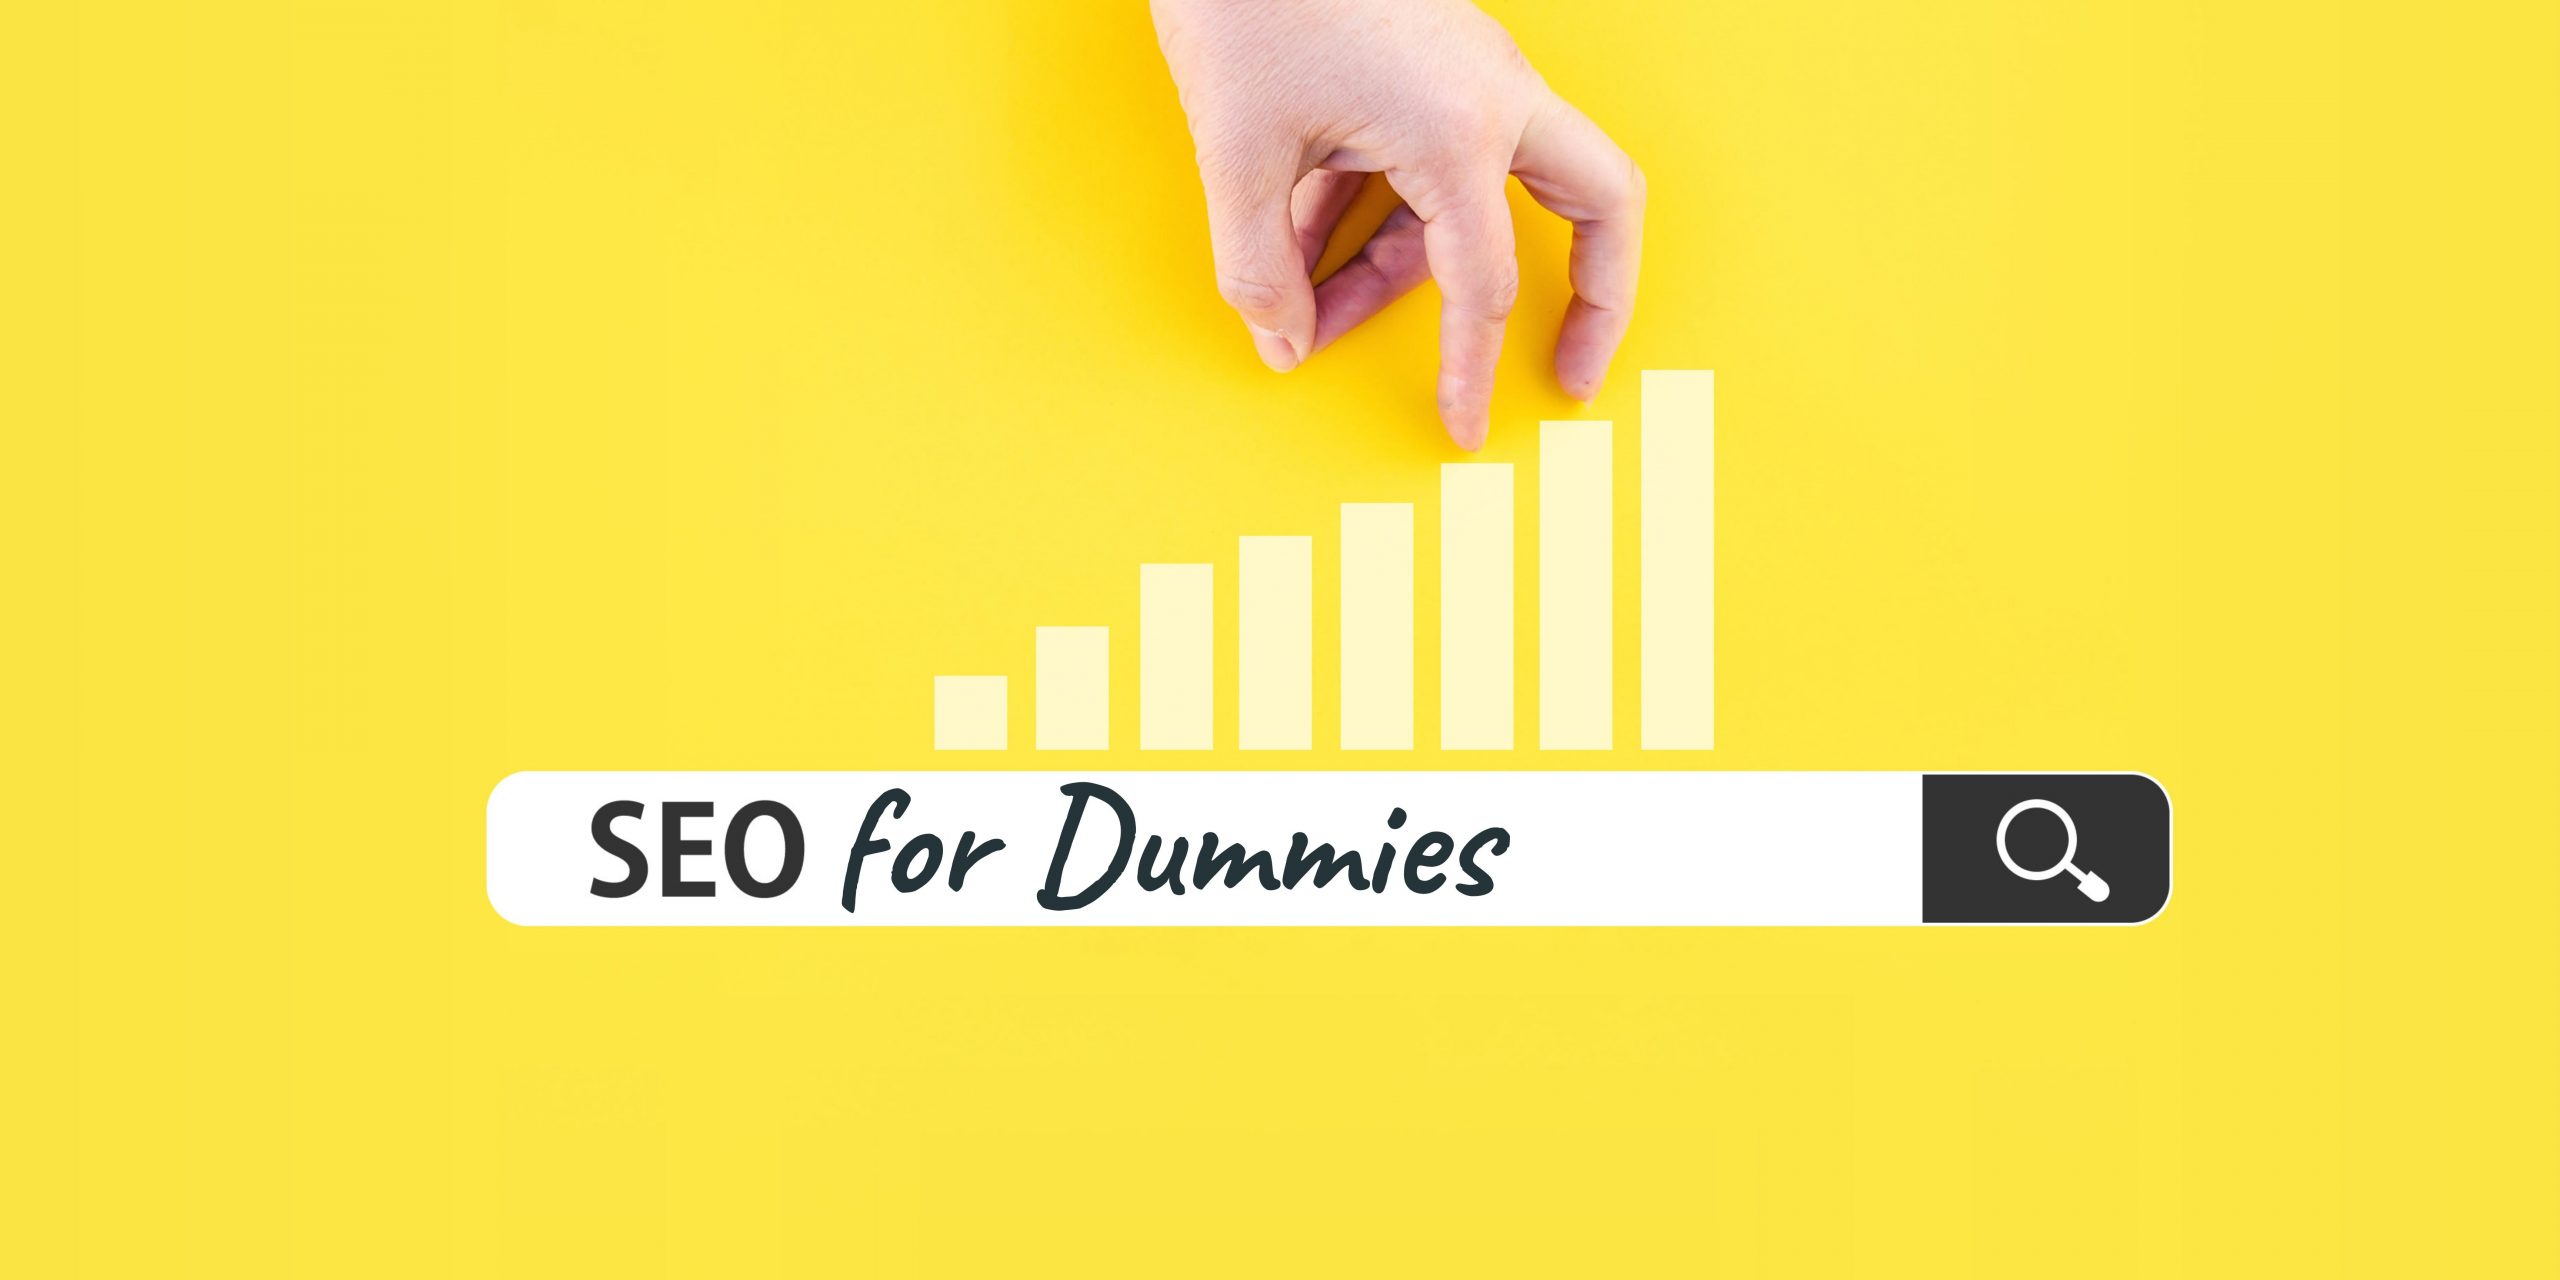 SEO for Dummies: Learn the Basics of Search Engine Optimization